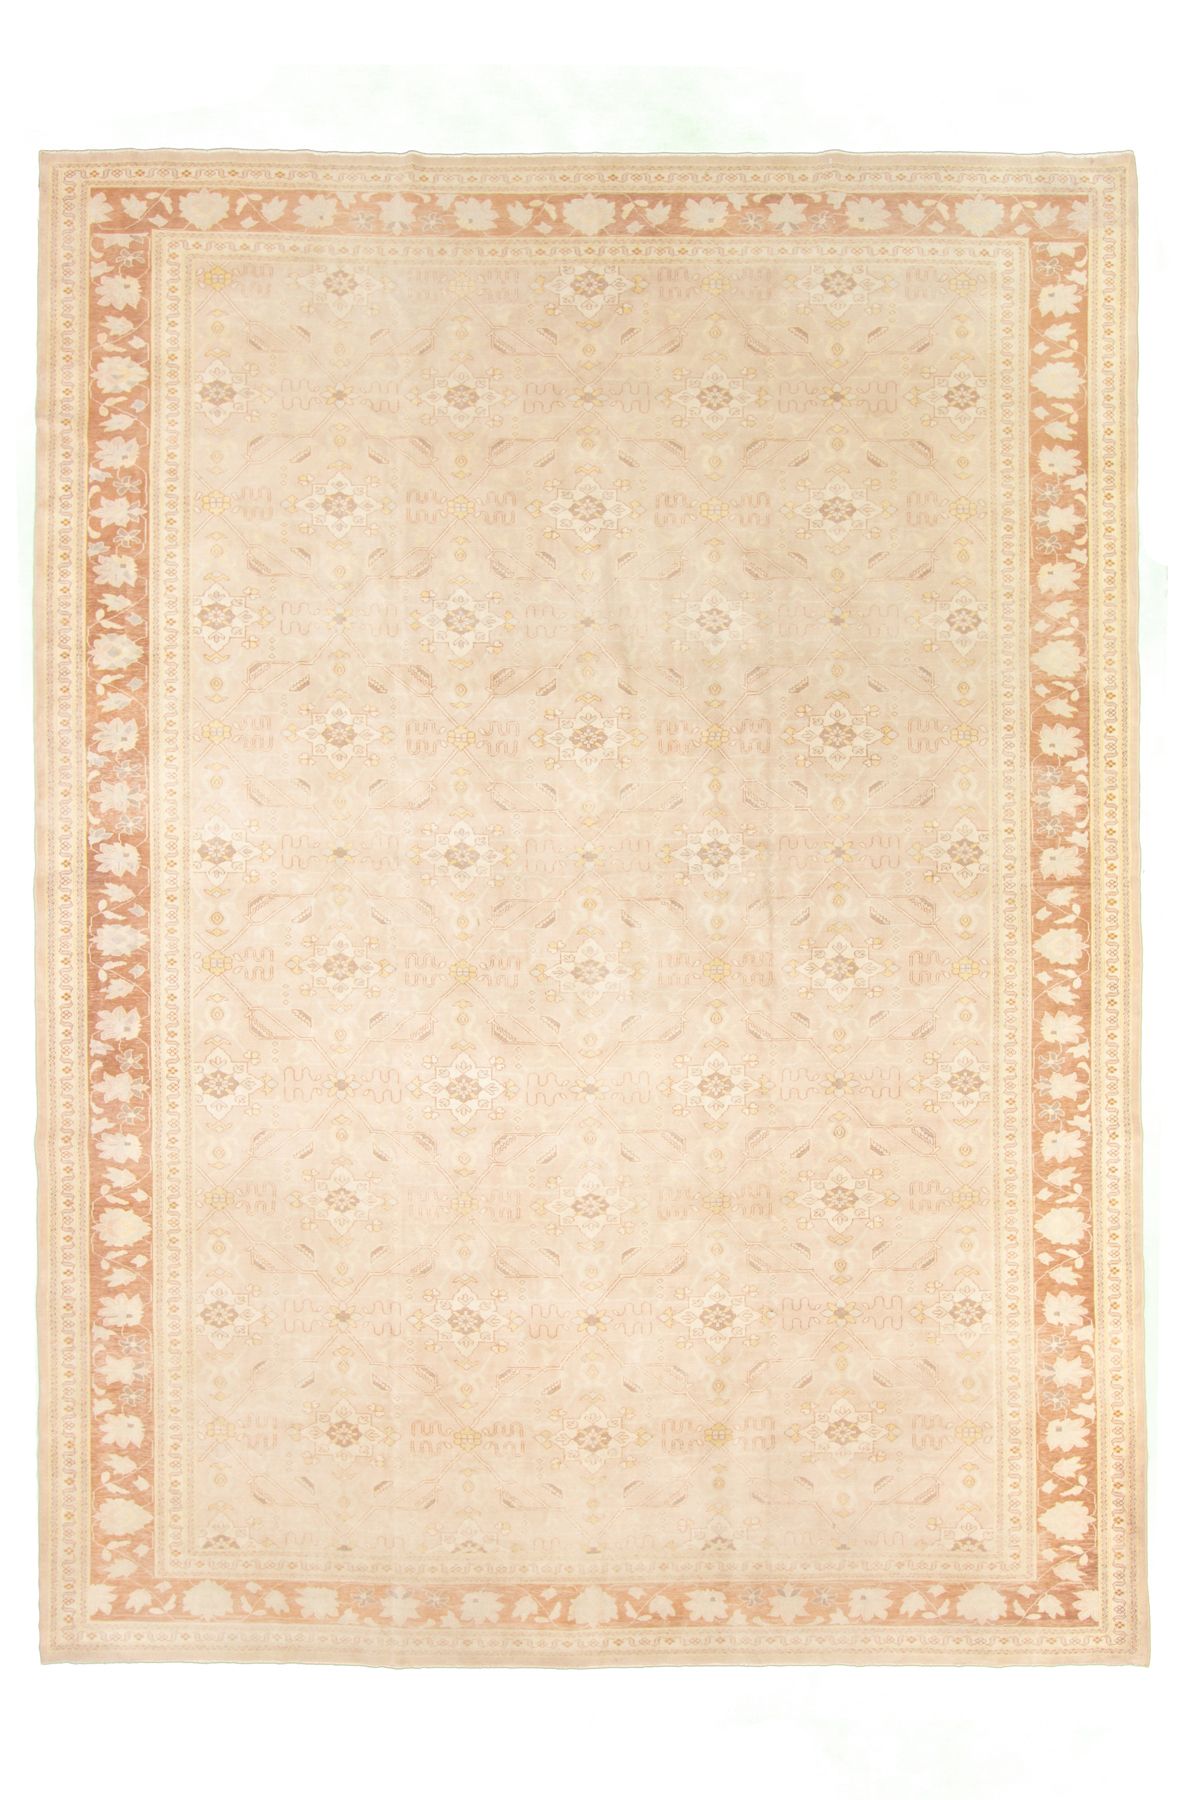 Hand-knotted Anatolian Authentic Geometric Wool Rug 11'4" x 15'2" Size: 11'4" x 15'2"  